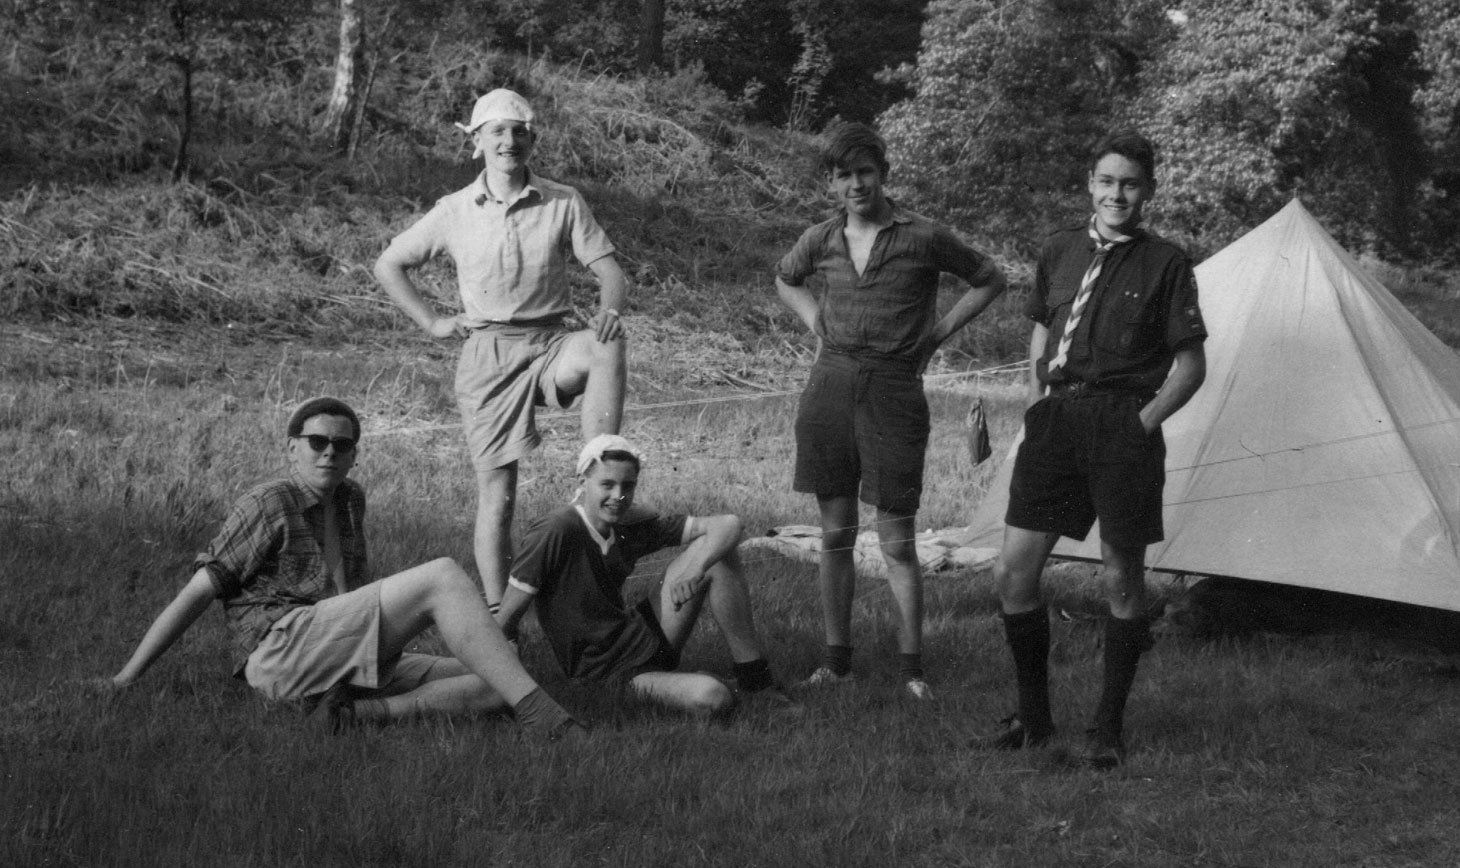 1959 Scout camp... simpler times! Not sure about the hankies on the heads though chaps!